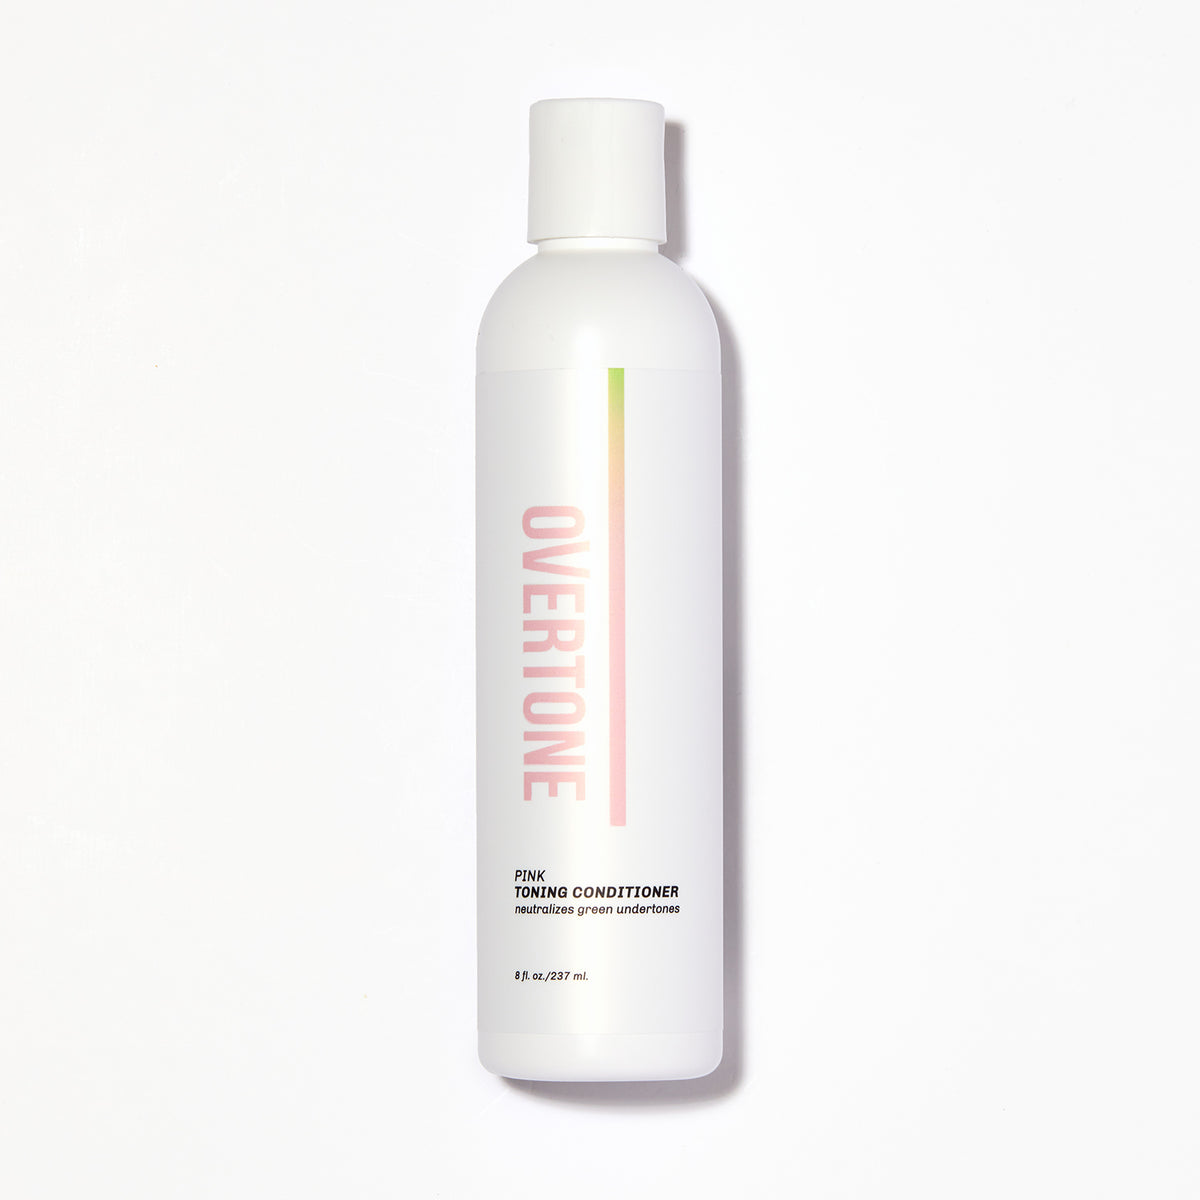 Pink Toning Conditioner